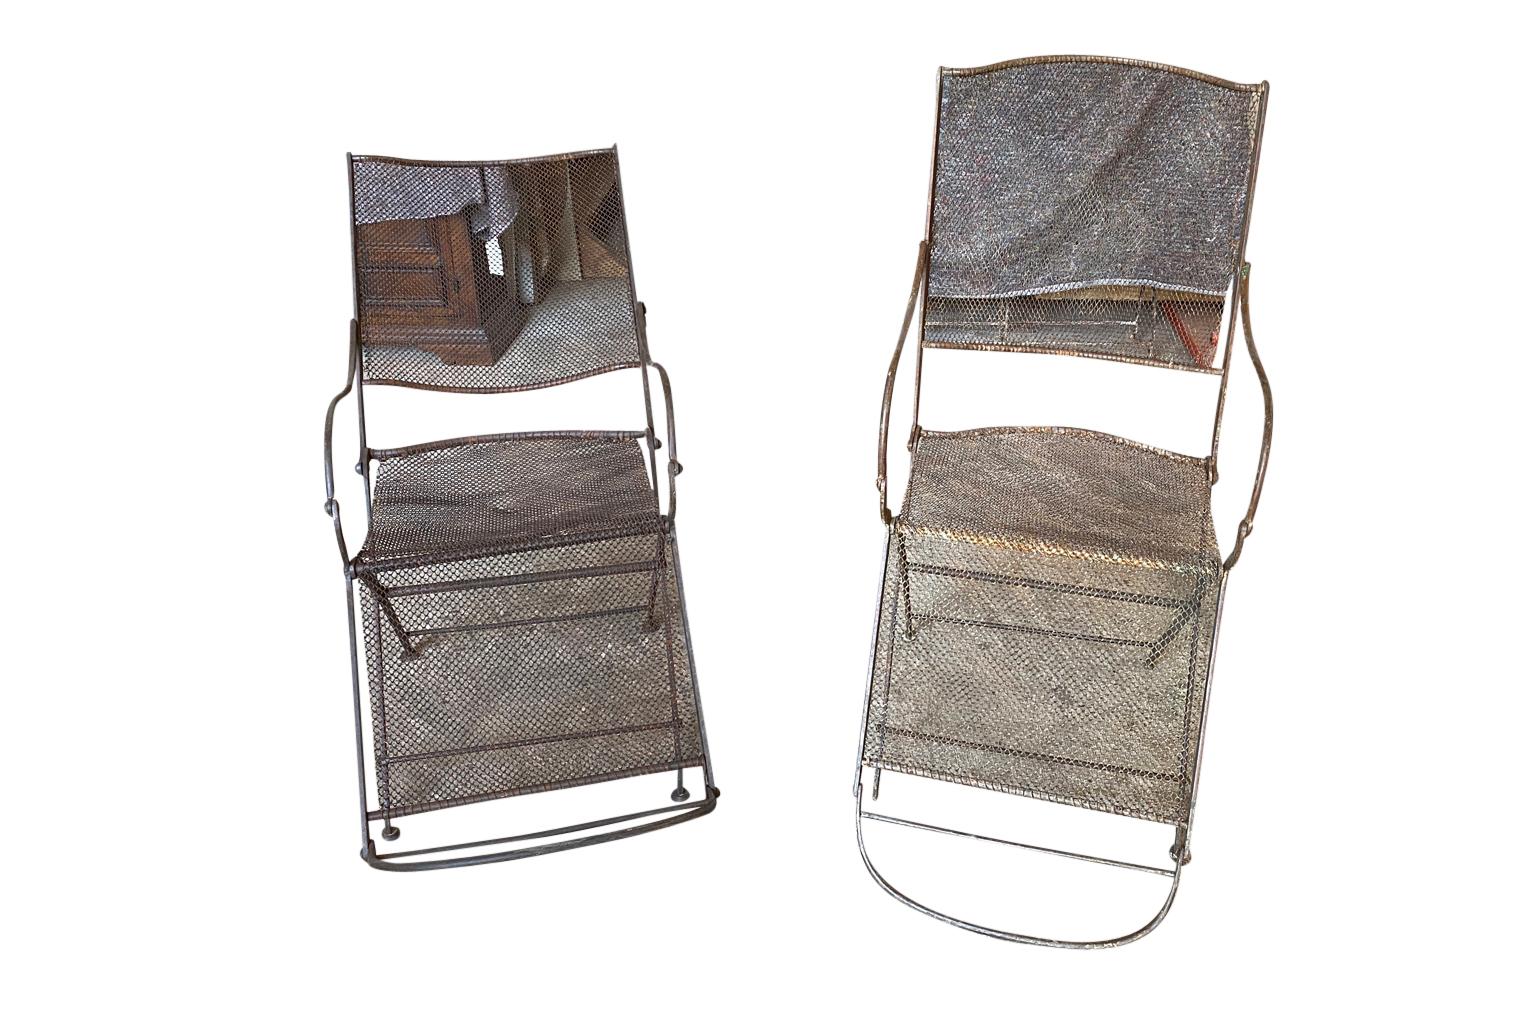 A sensational pair of English 19th century Garden Arm Chairs. Soundly constructed from iron with iron mesh netting backs and seats. The chairs comfortably recline. Terrific for any garden or interior.